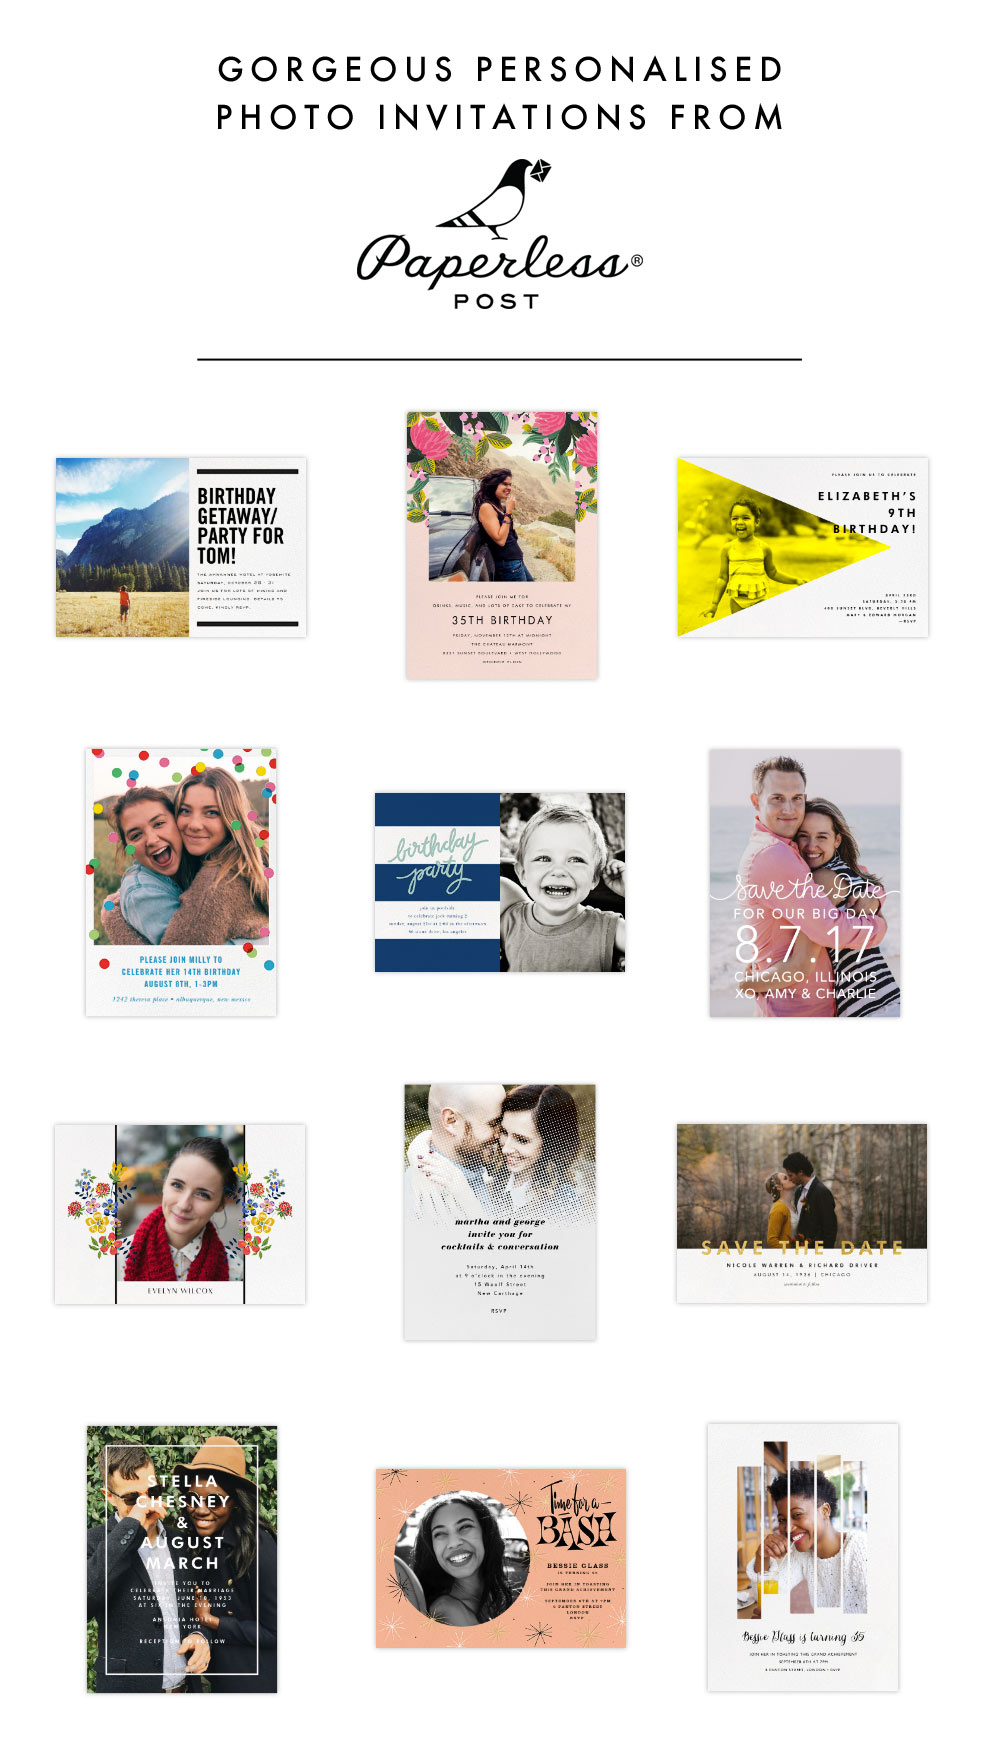 Personalisable photo invitations from Paperless Post